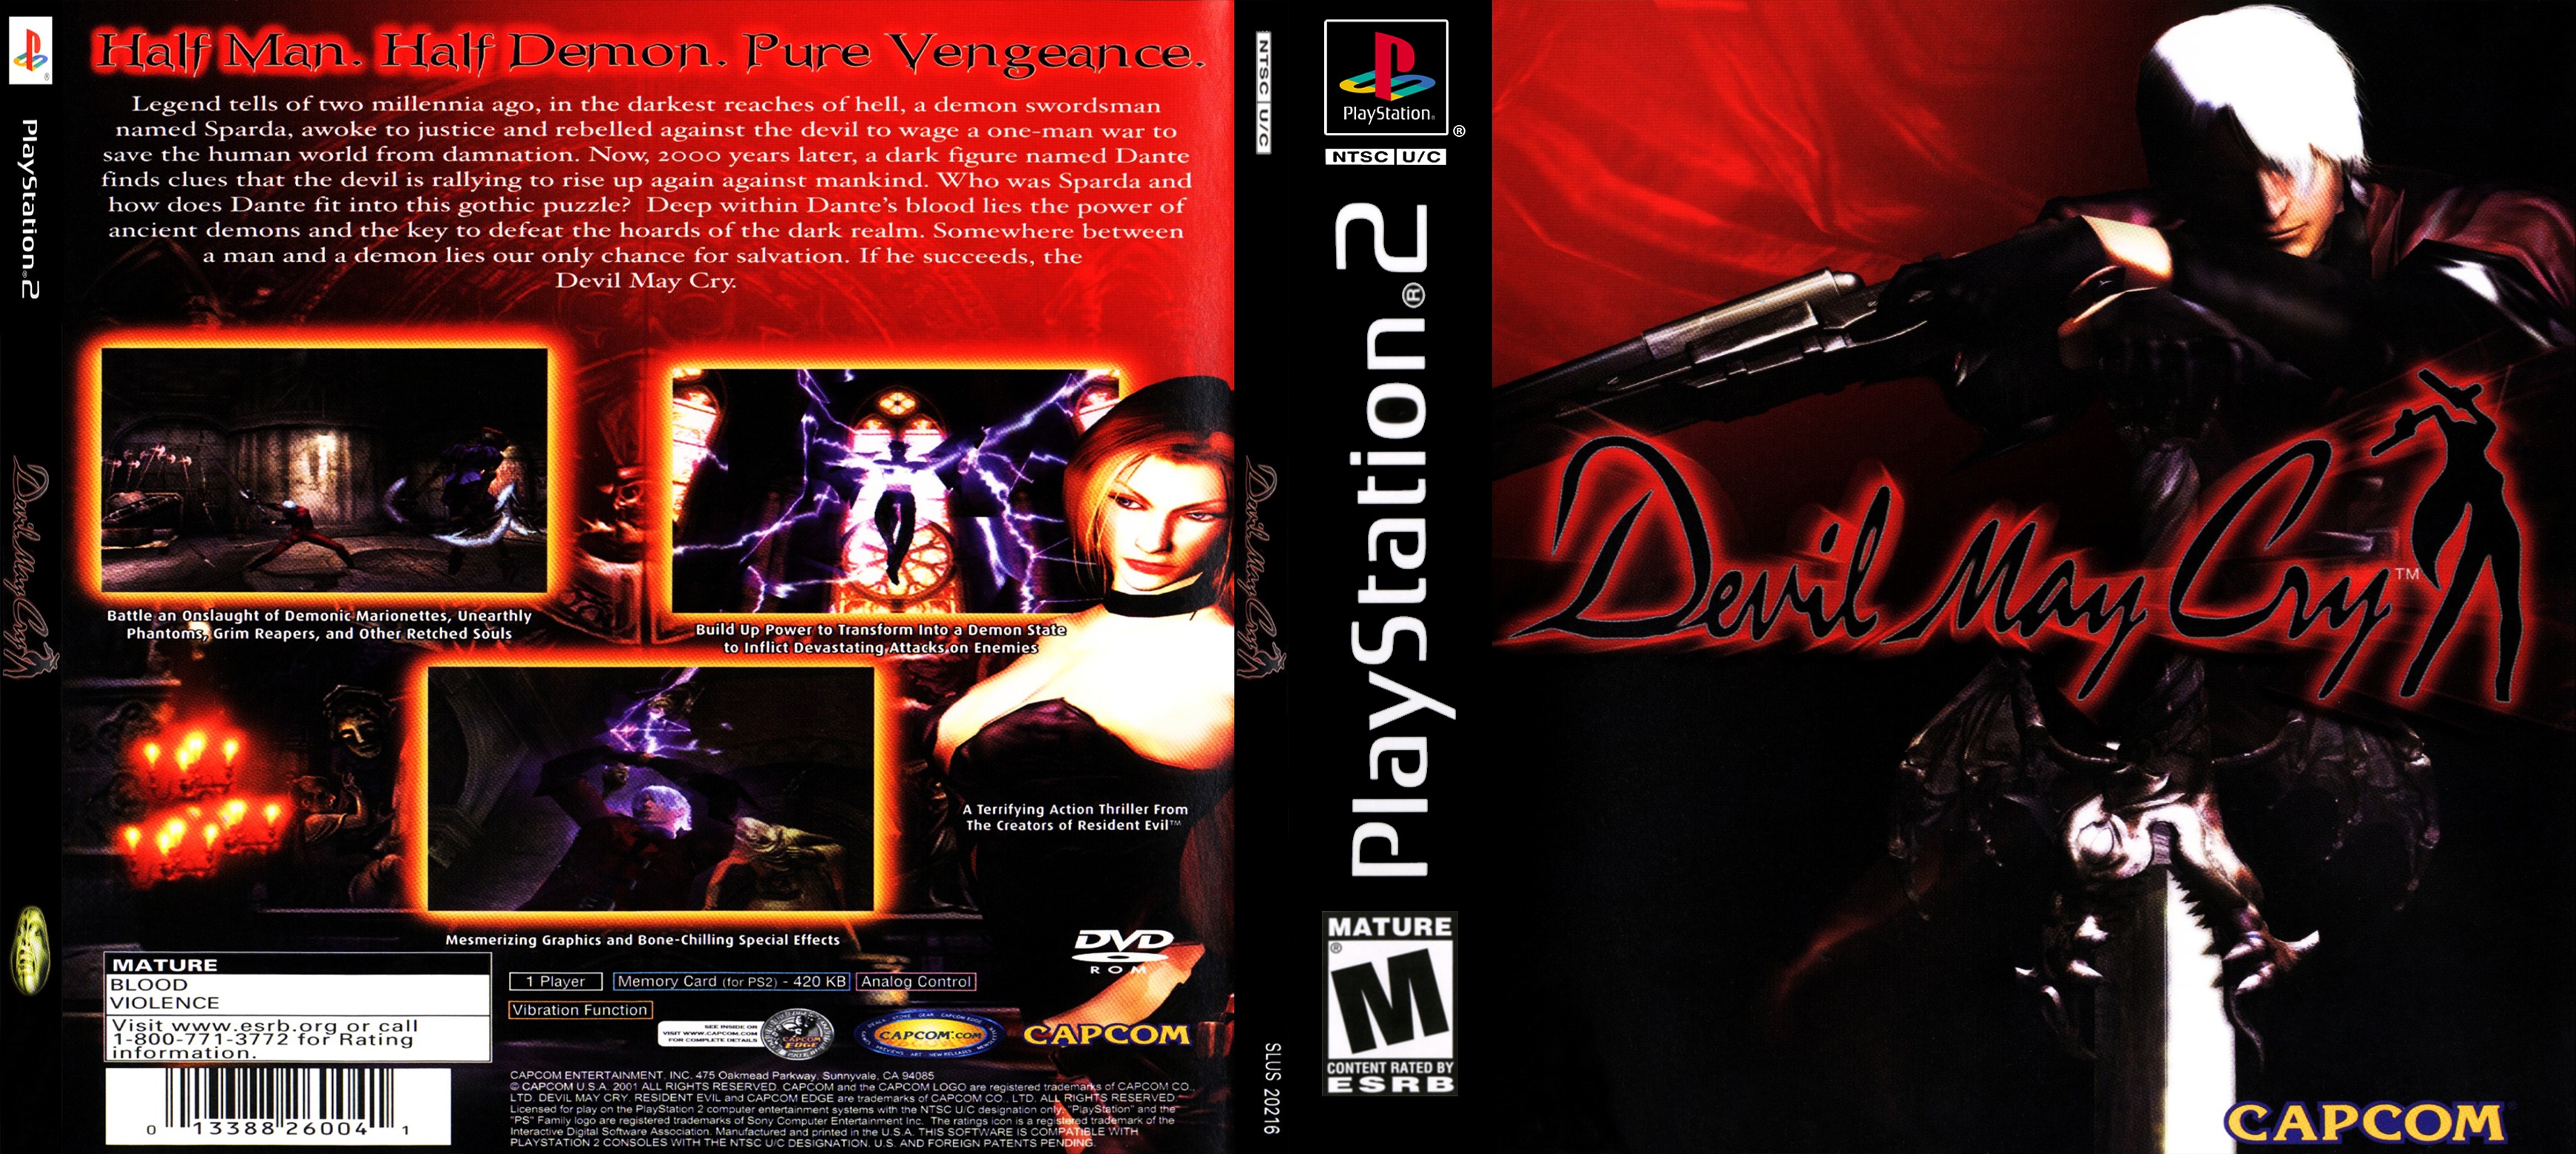 Devil May Cry PS1 Case box cover